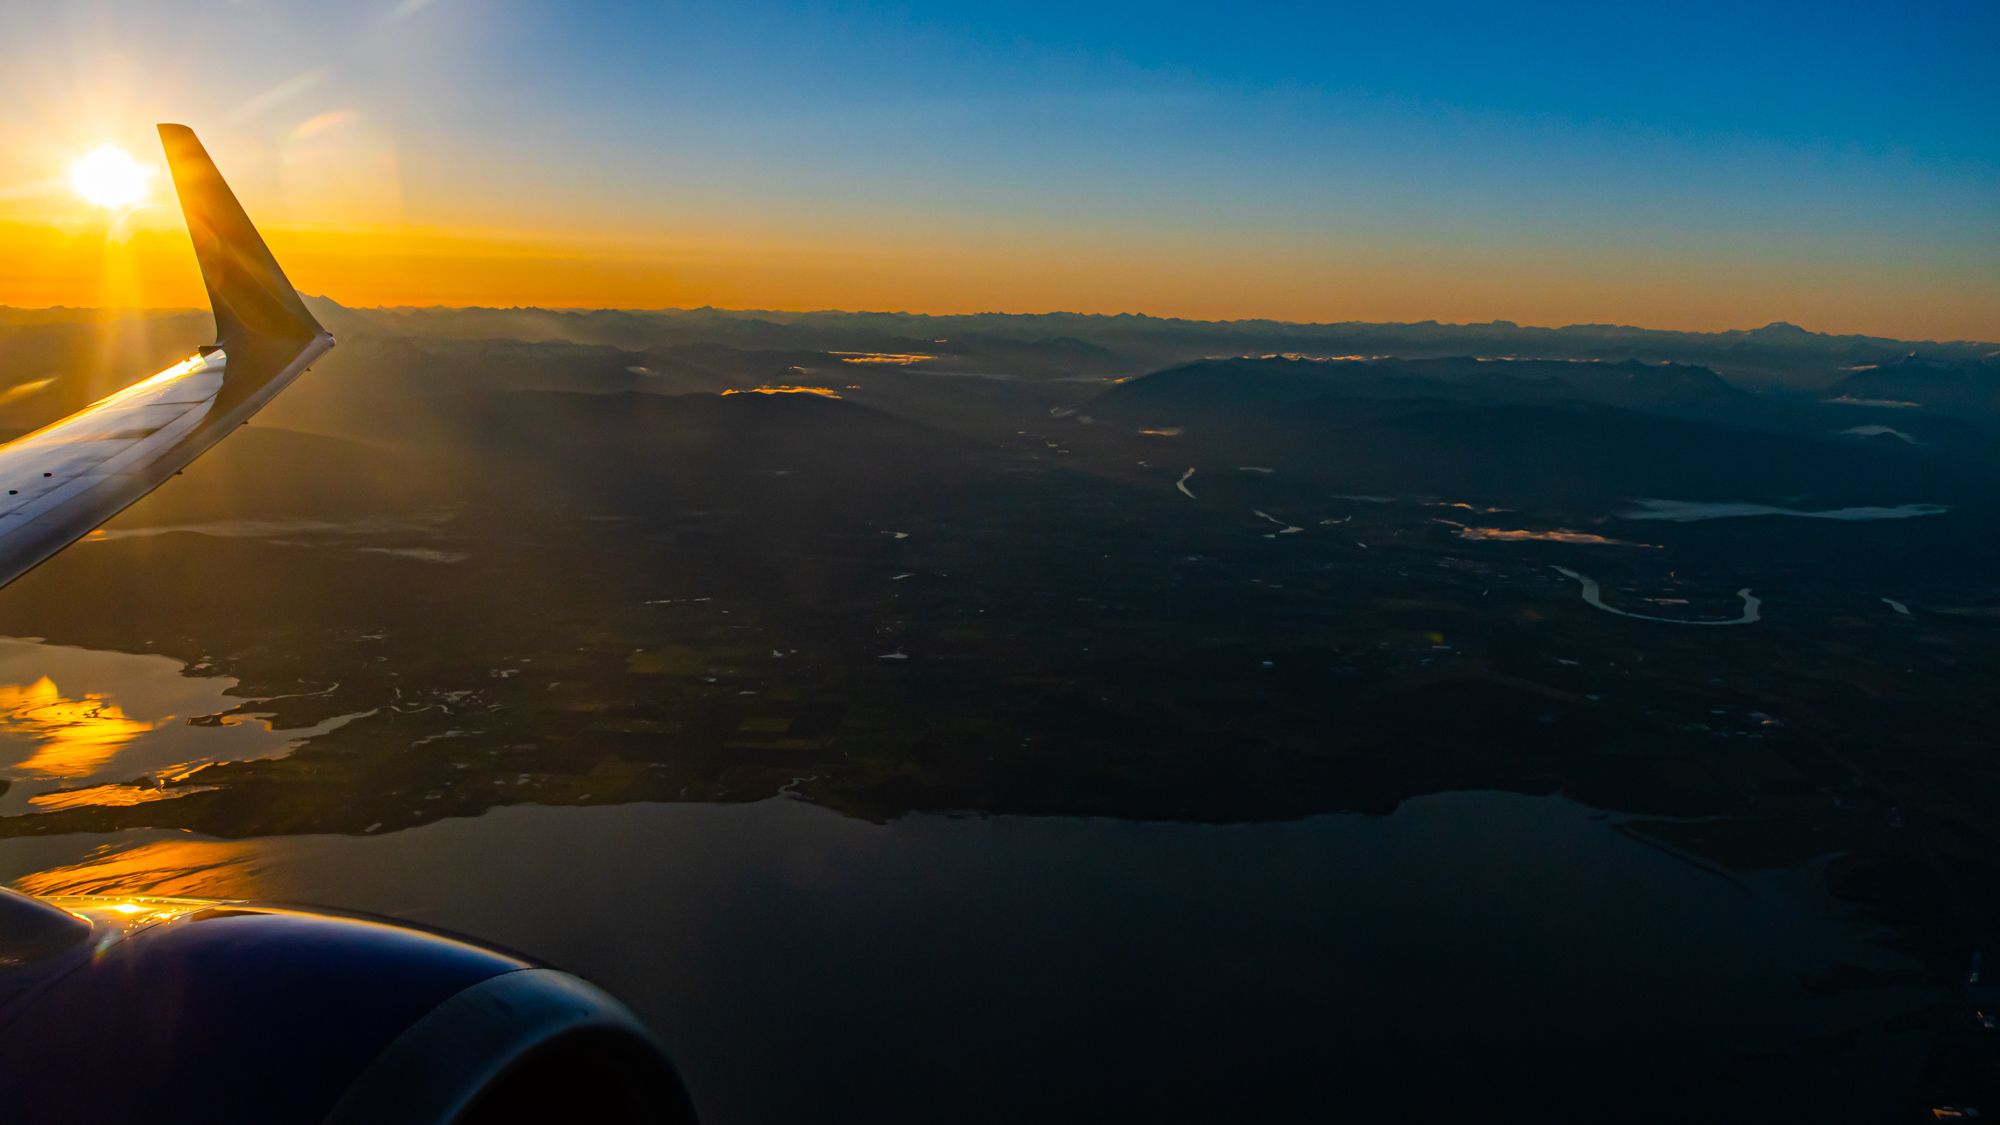 Soaring at Sunrise - A Look Back at a Boeing 737-700 Wing Looking Over Skagit County